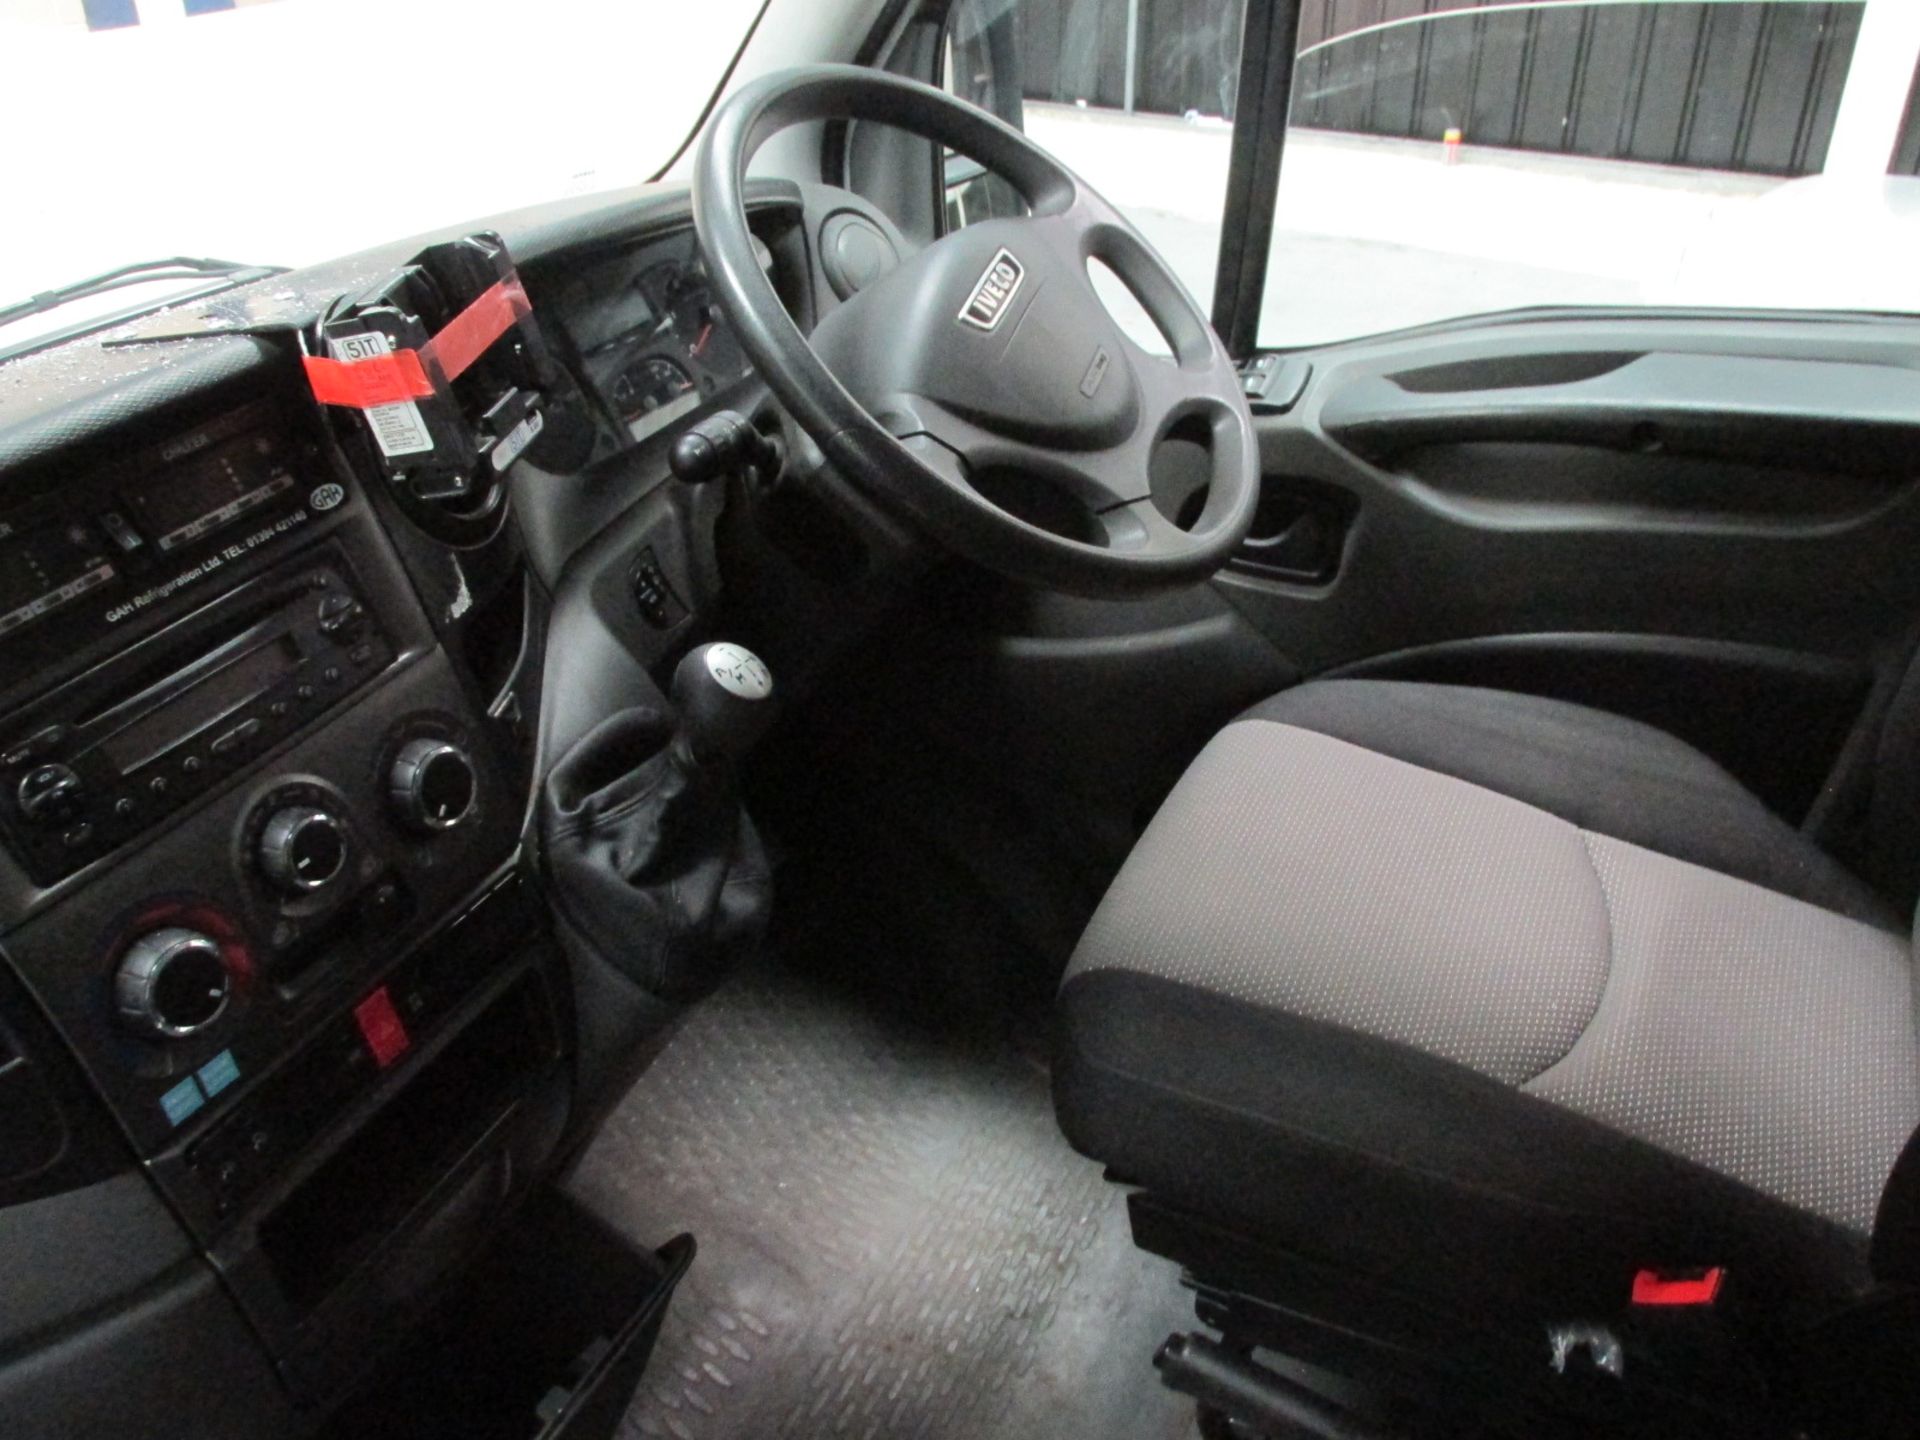 2014 Iveco Daily 35S11 3750 WB 2.4 HPi - Image 8 of 17